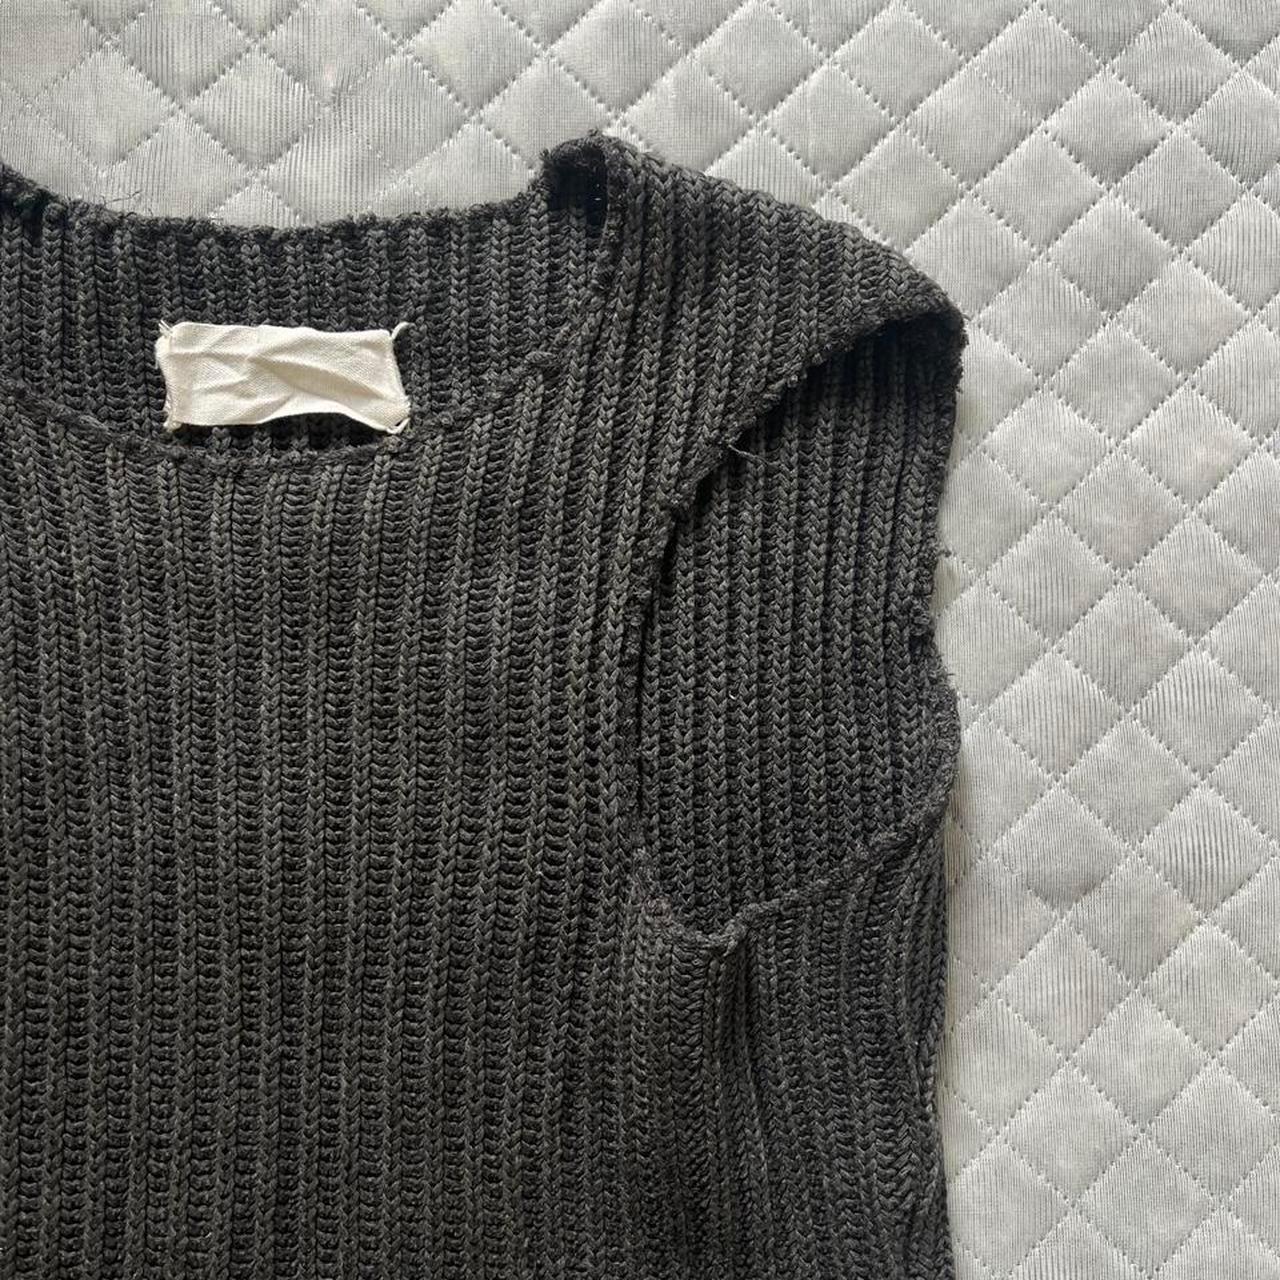 Martin Margiela AW1998 Flat Collection Knitted Vest In Excellent Condition For Sale In FITZROY, AU